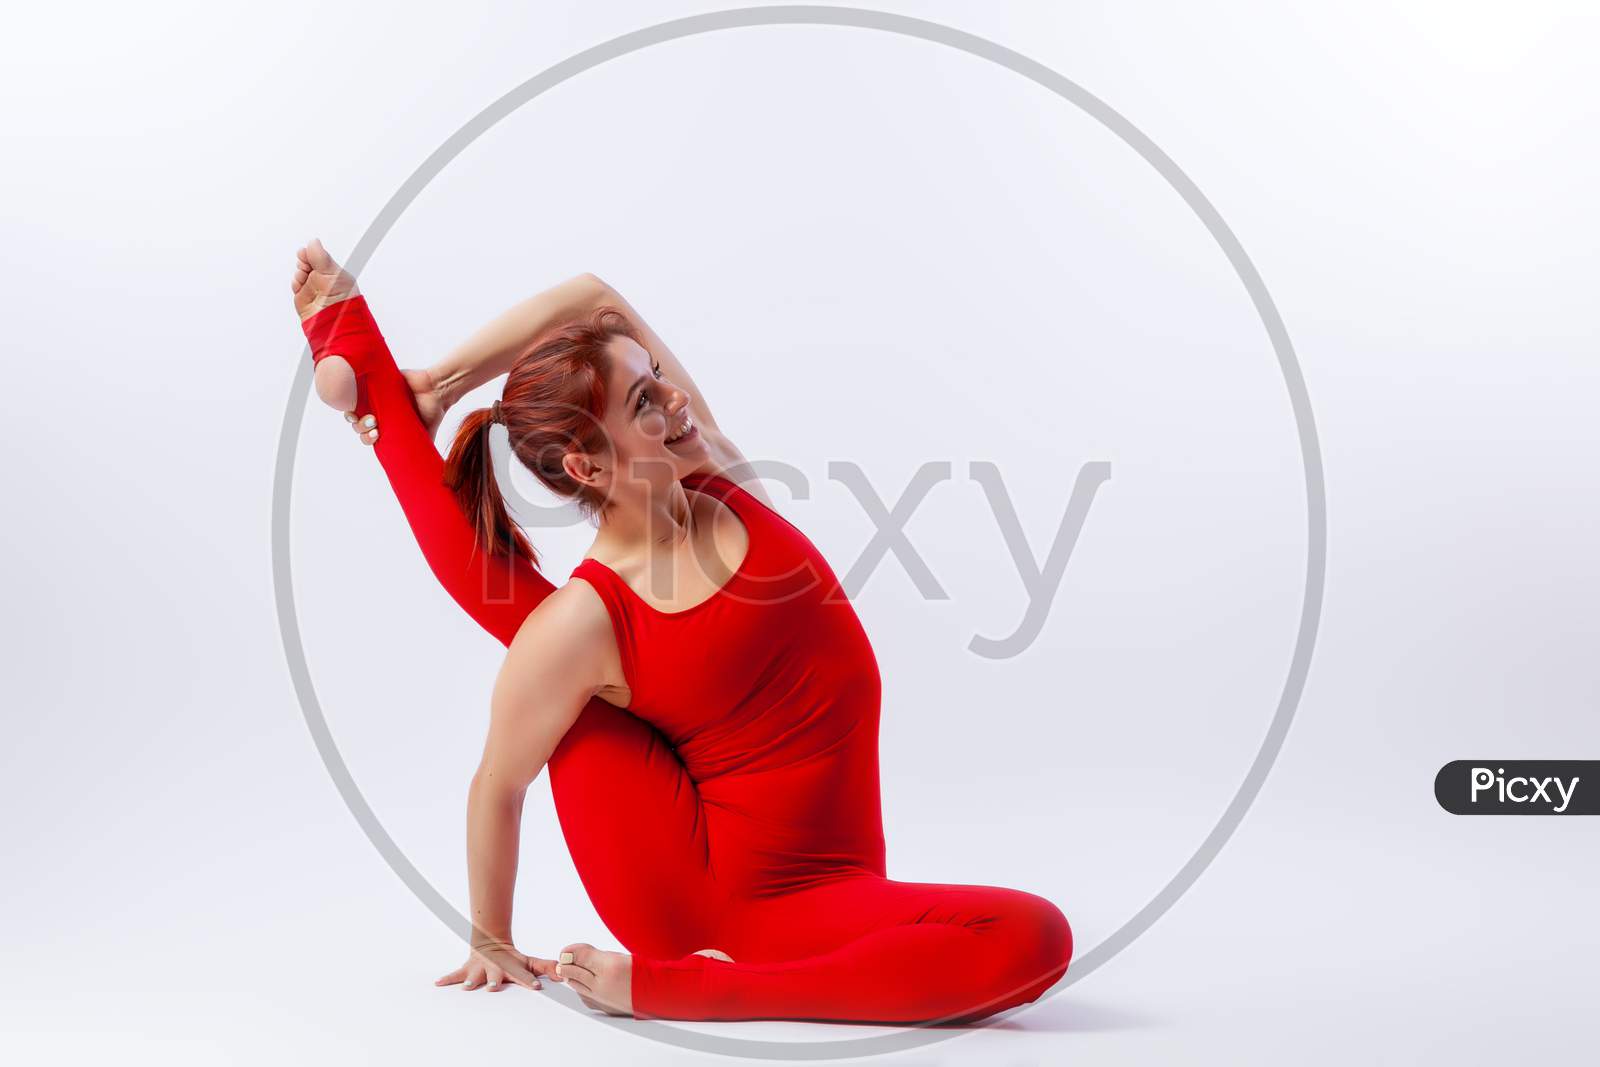 Beautiful Slim Woman In Sports Overalls  Doing Yoga, Standing In An Asana Balancing Pose - Heron Pose  On White  Isolated Background. The Concept Of Sports And Meditation. Training For Stretching And Yoga